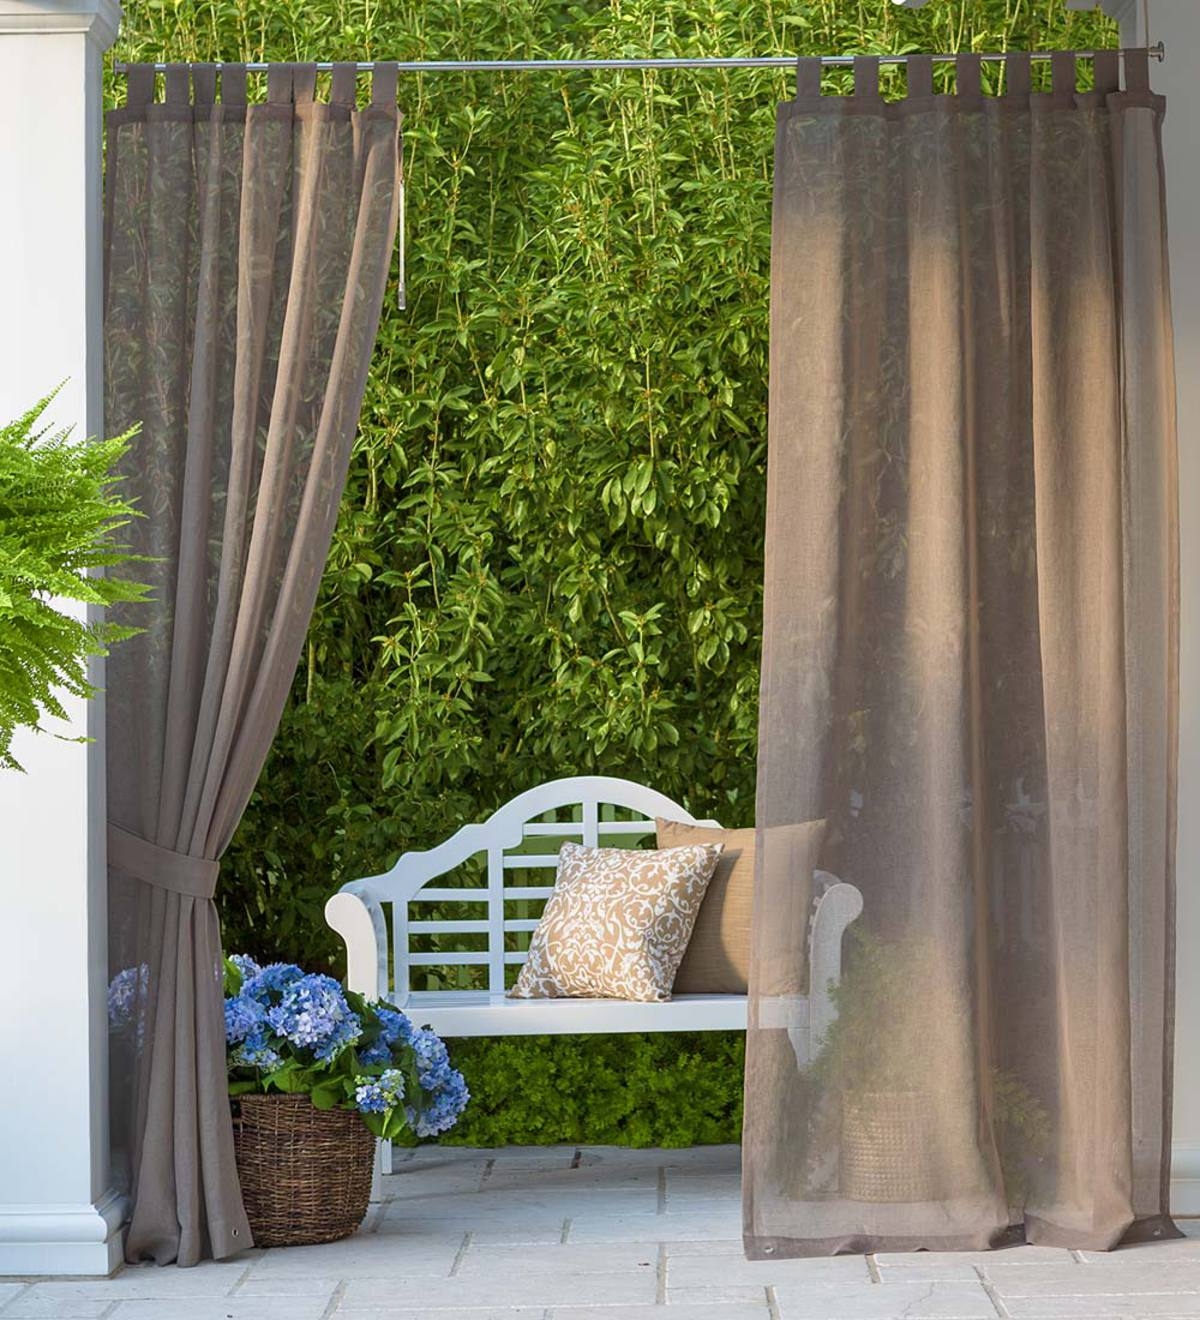 Details about   Waterproof Outdoor Curtains for Patio Voile Sheer Screening Drapes Panel Eyelets 